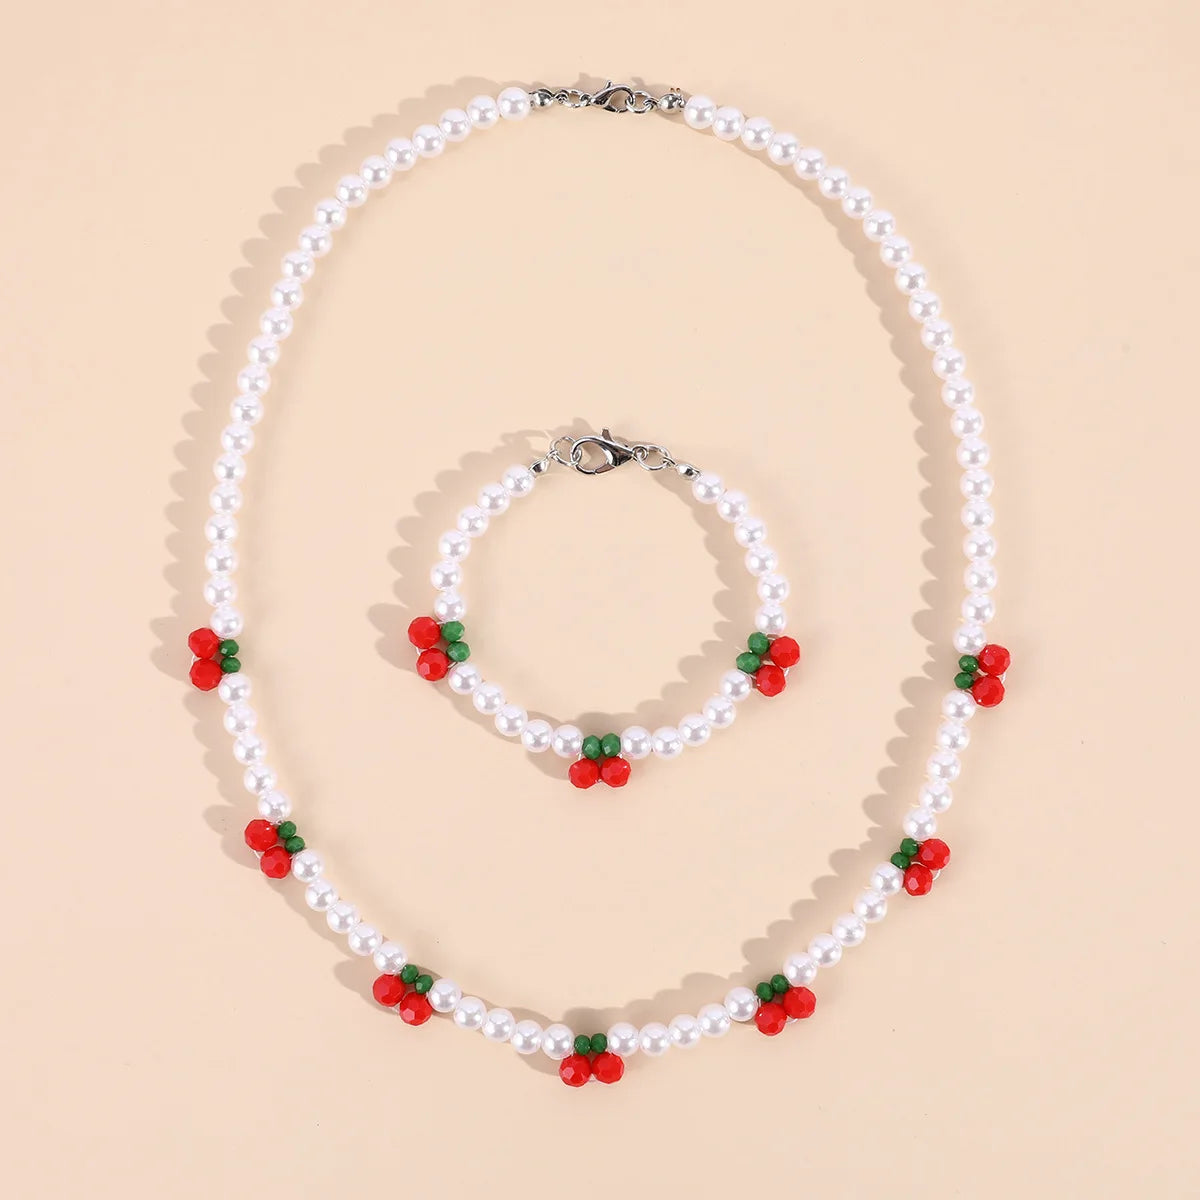 Makersland Cute Red Cherry Acrylic Children's Bracelet Necklace Set Girls Charm Gift Kid's Jewelry Accessories Wholesale